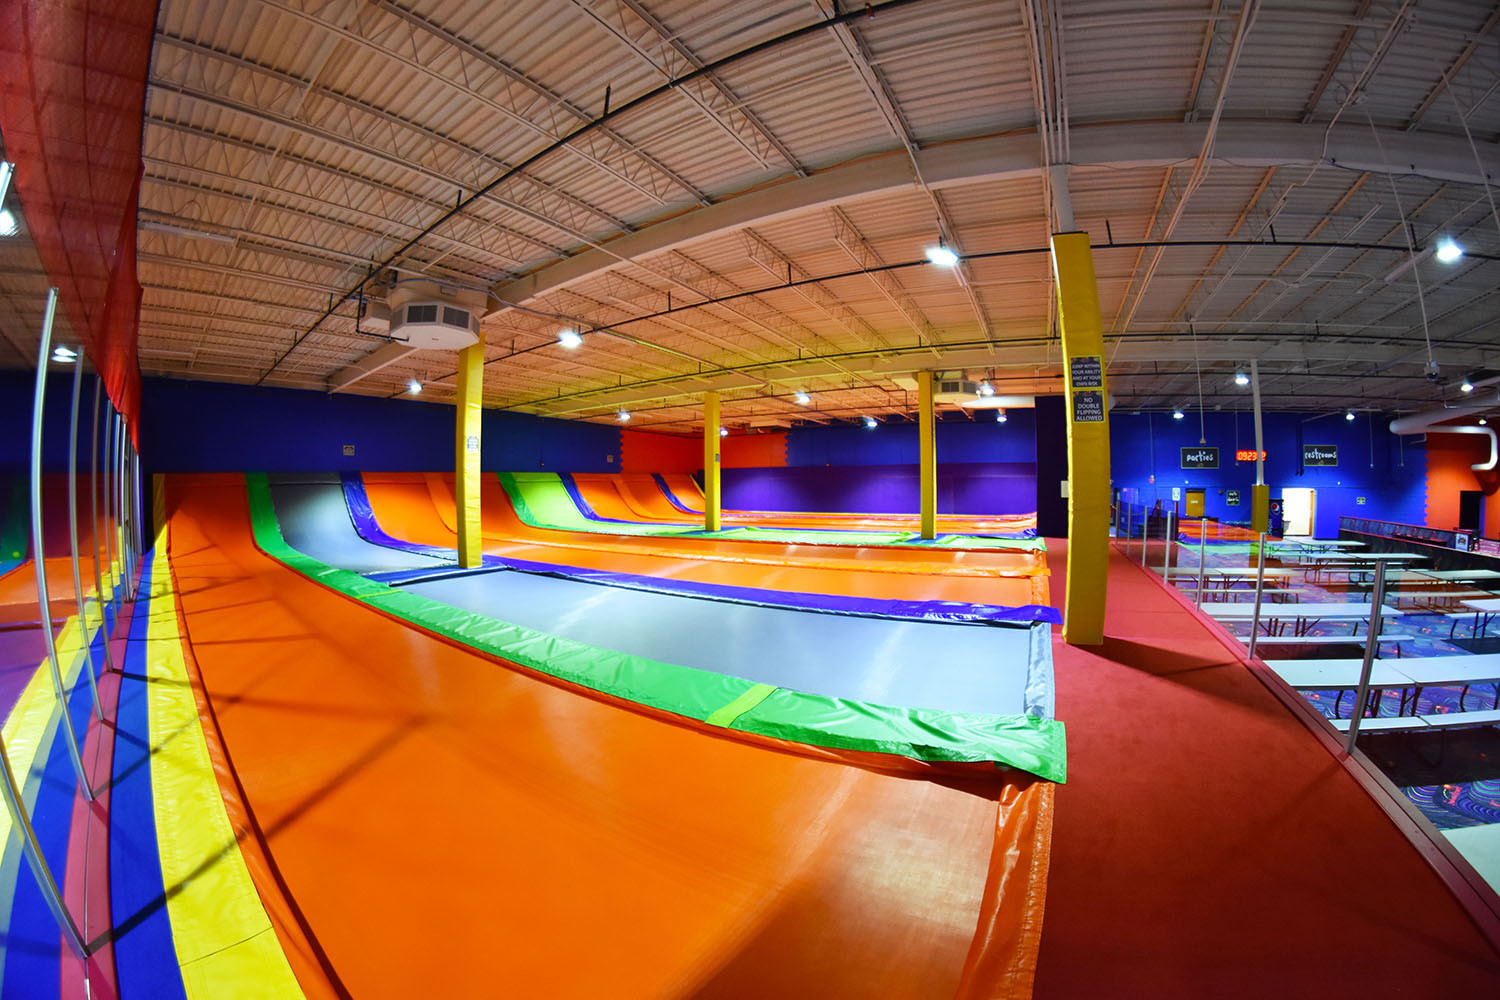 Kids Birthday Party Places Cary Nc
 Cary NC – Jumpstreet Indoor Trampoline Park